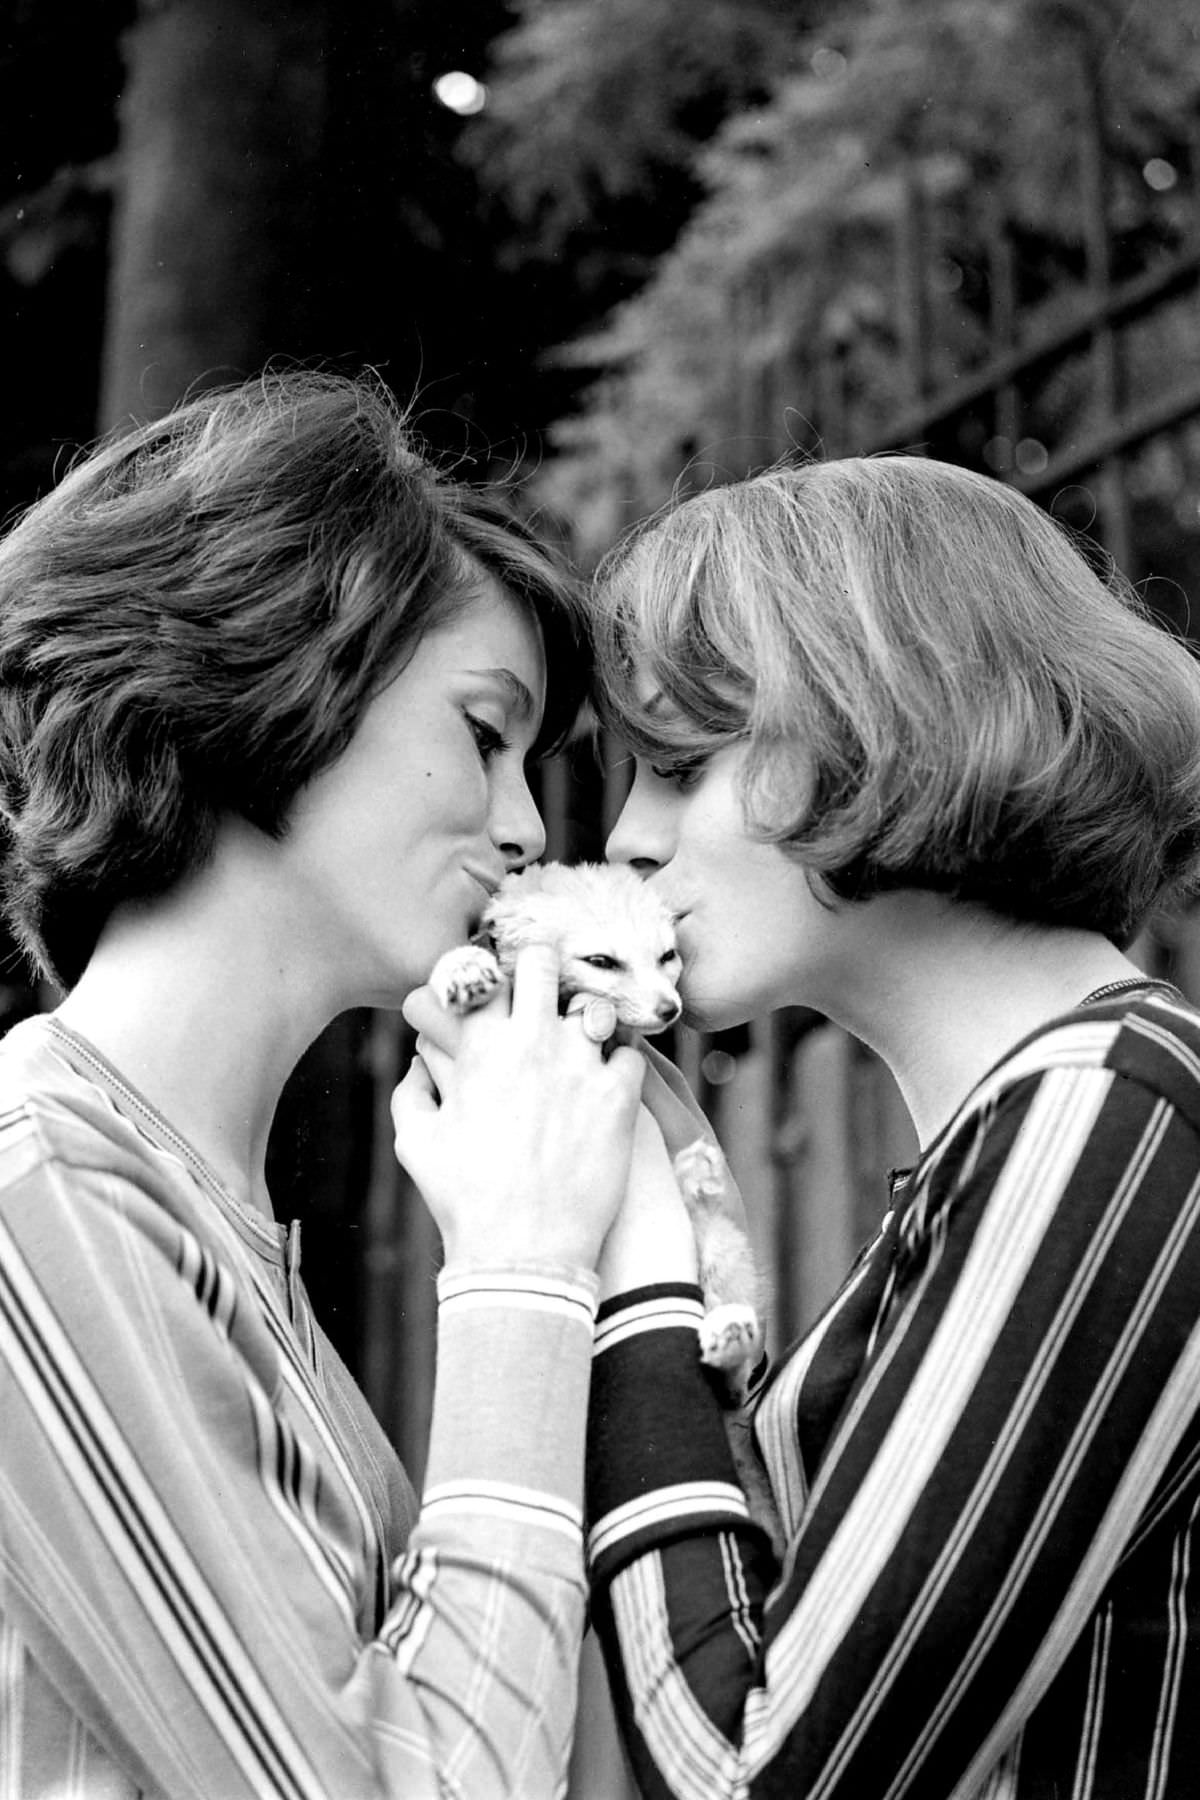 Catherine Deneuve and Françoise Dorléac, in their matching stripes, smothered a feline with kisses in an outdoor portrait series from 1960.